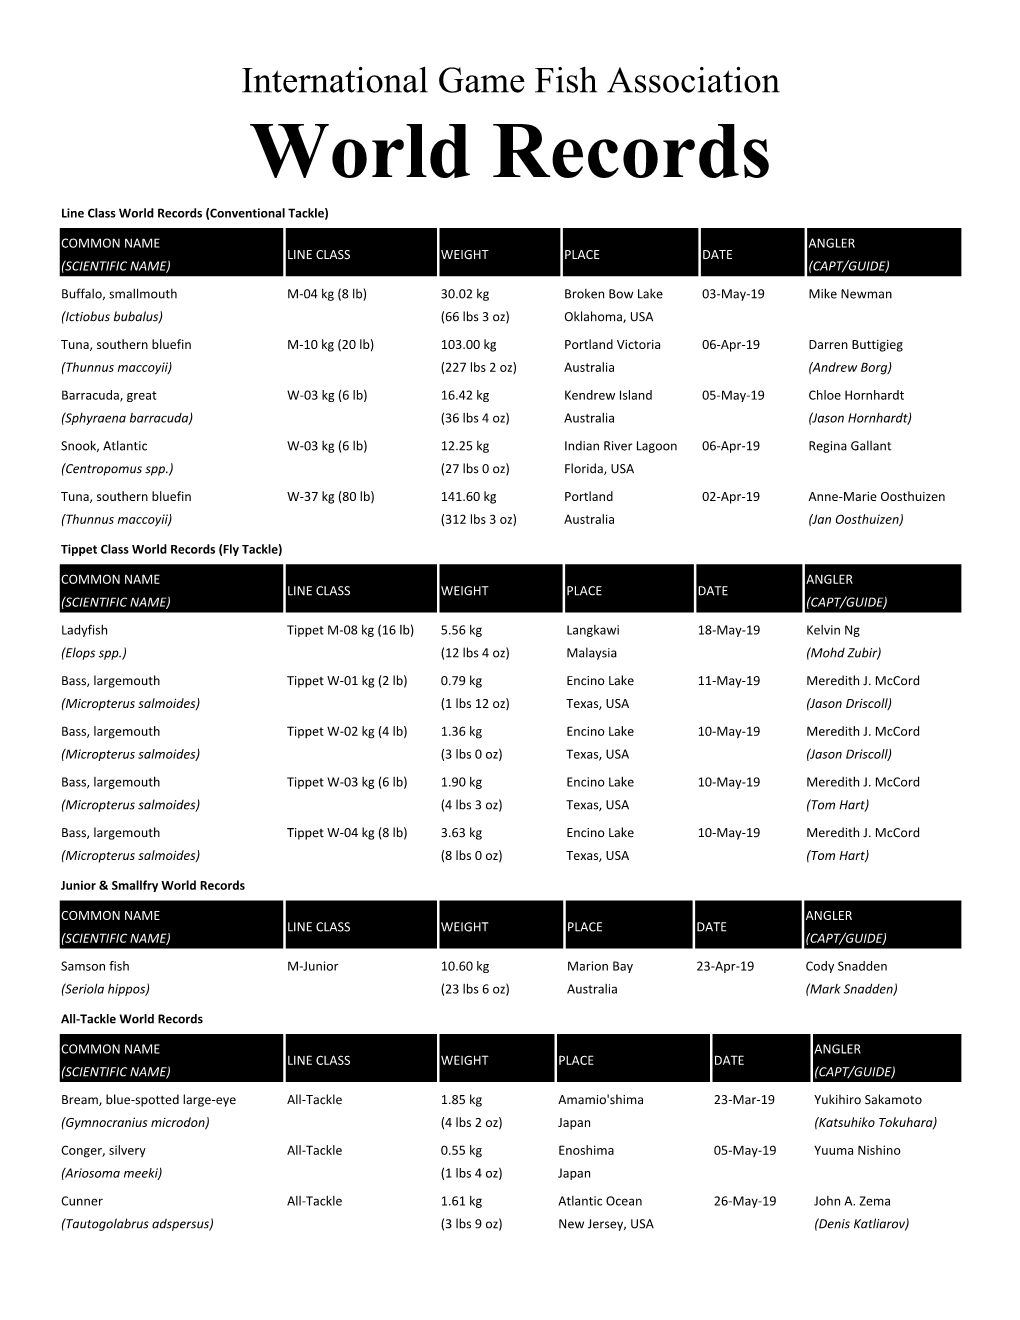 International Game Fish Association World Records Line Class World Records (Conventional Tackle)